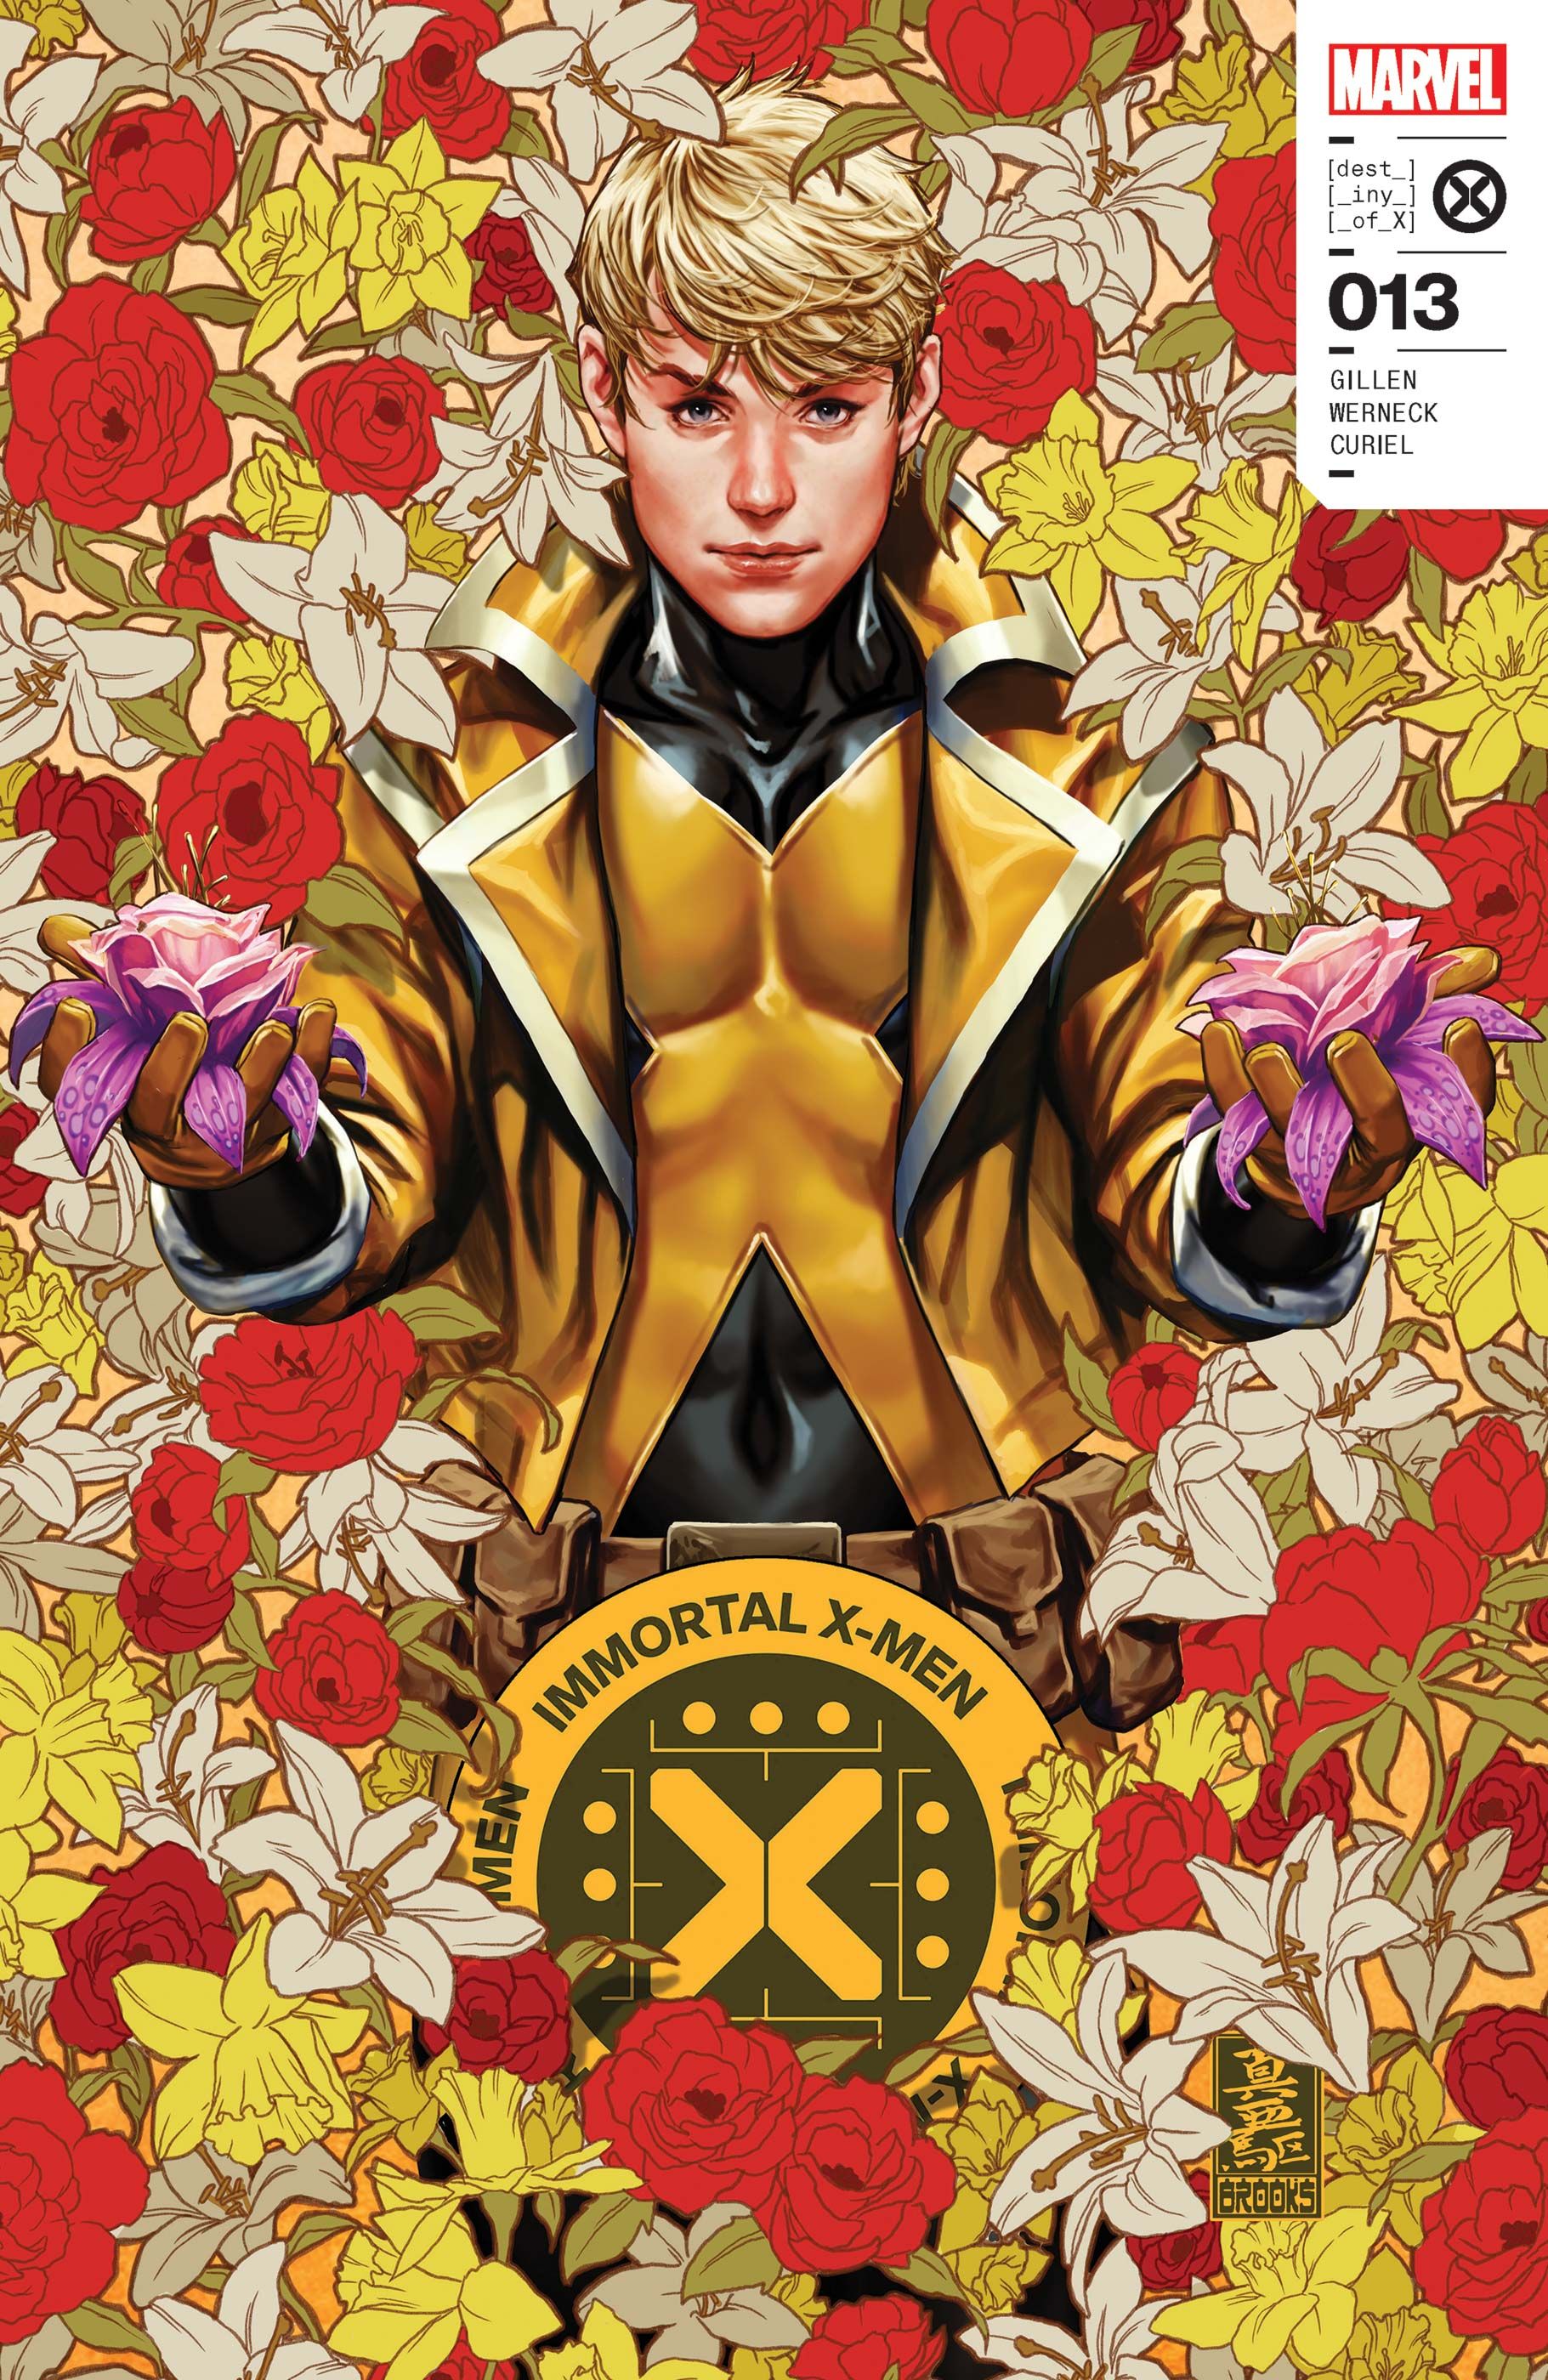 Mark Brooks' cover to Immortal X-Men #13, featuring Doug Ramsey surrounded by Krakoan flowers